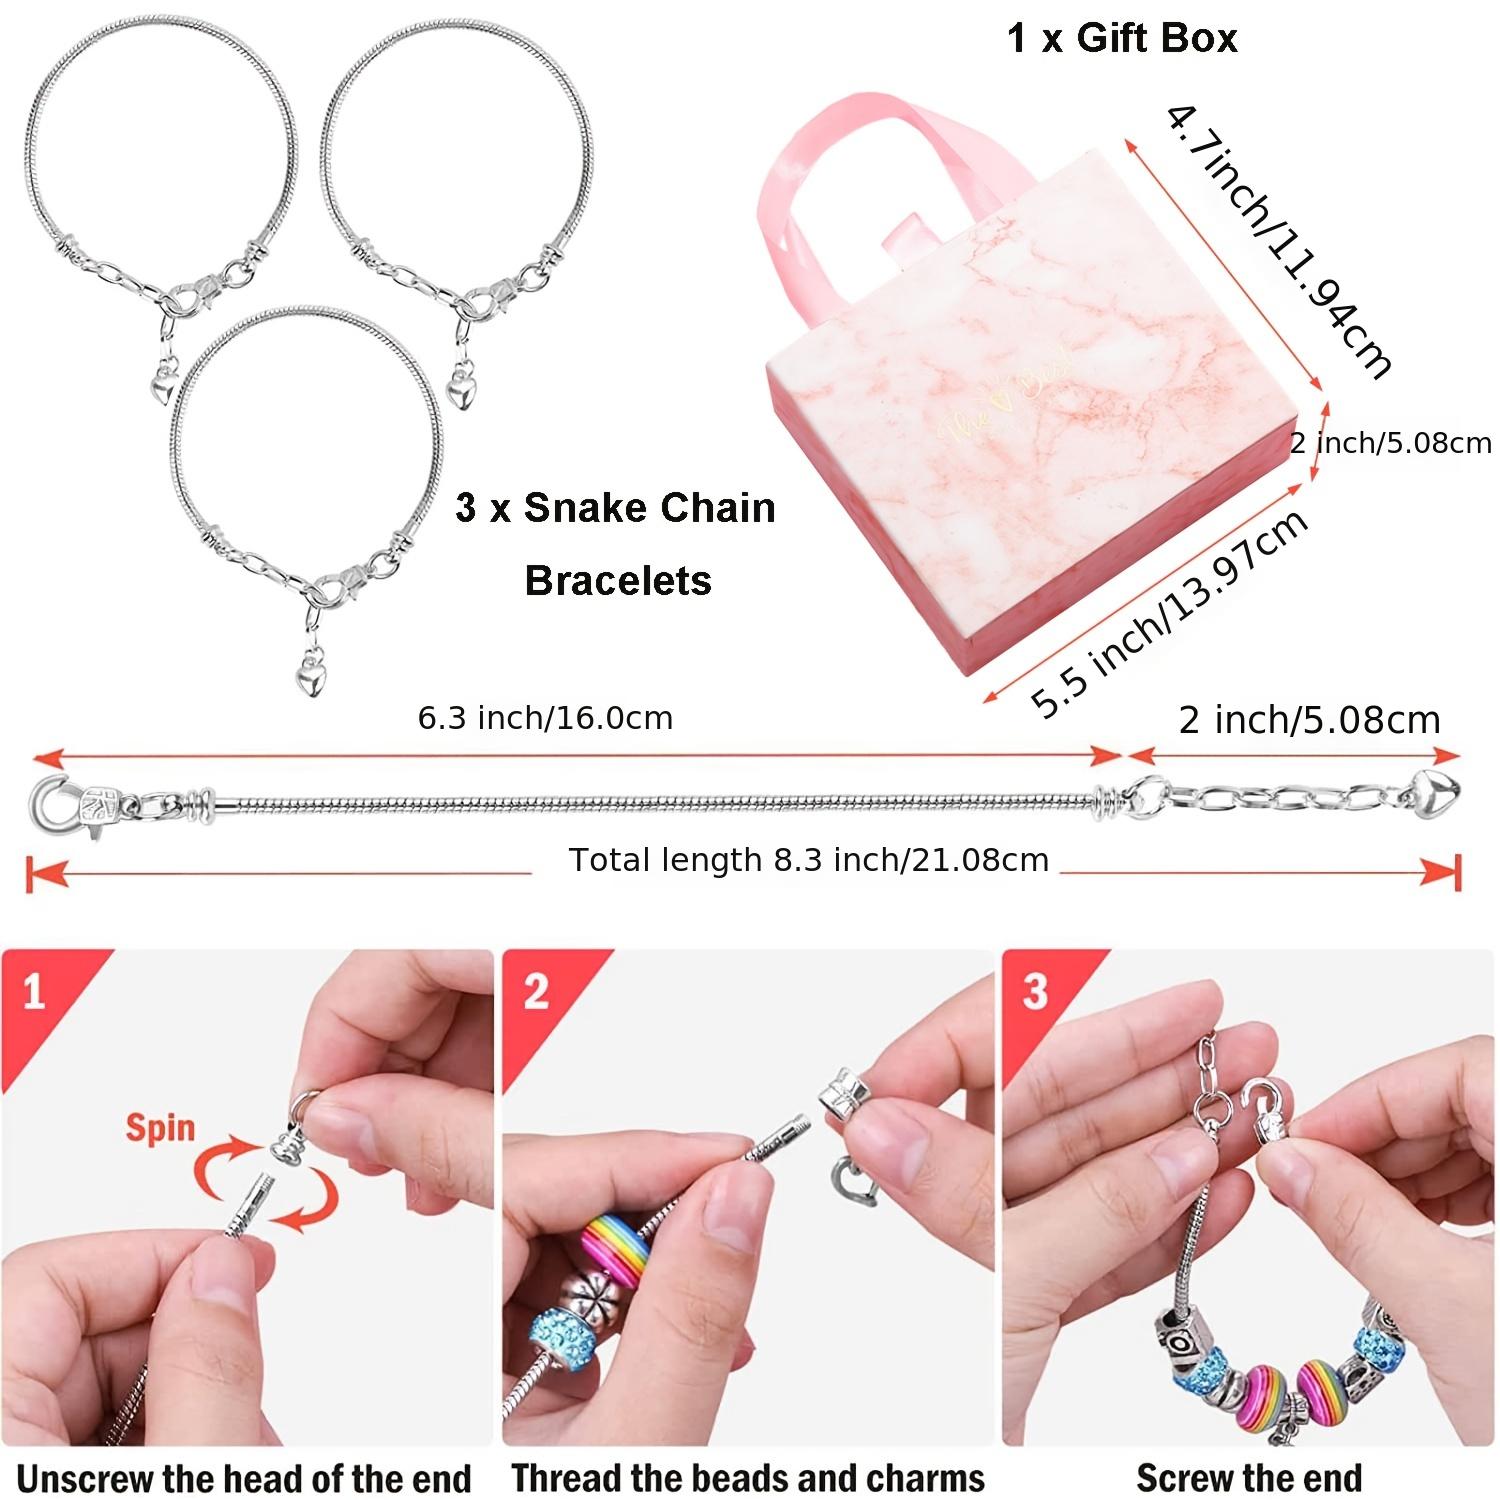 YALFEN Jewelry Making Kit for Girls, 183PCS Charm Bracelet Making Kit Girls  Beads Necklace DIY Kit，Mermaid Crafts Gifts Set with Beads and Charms for